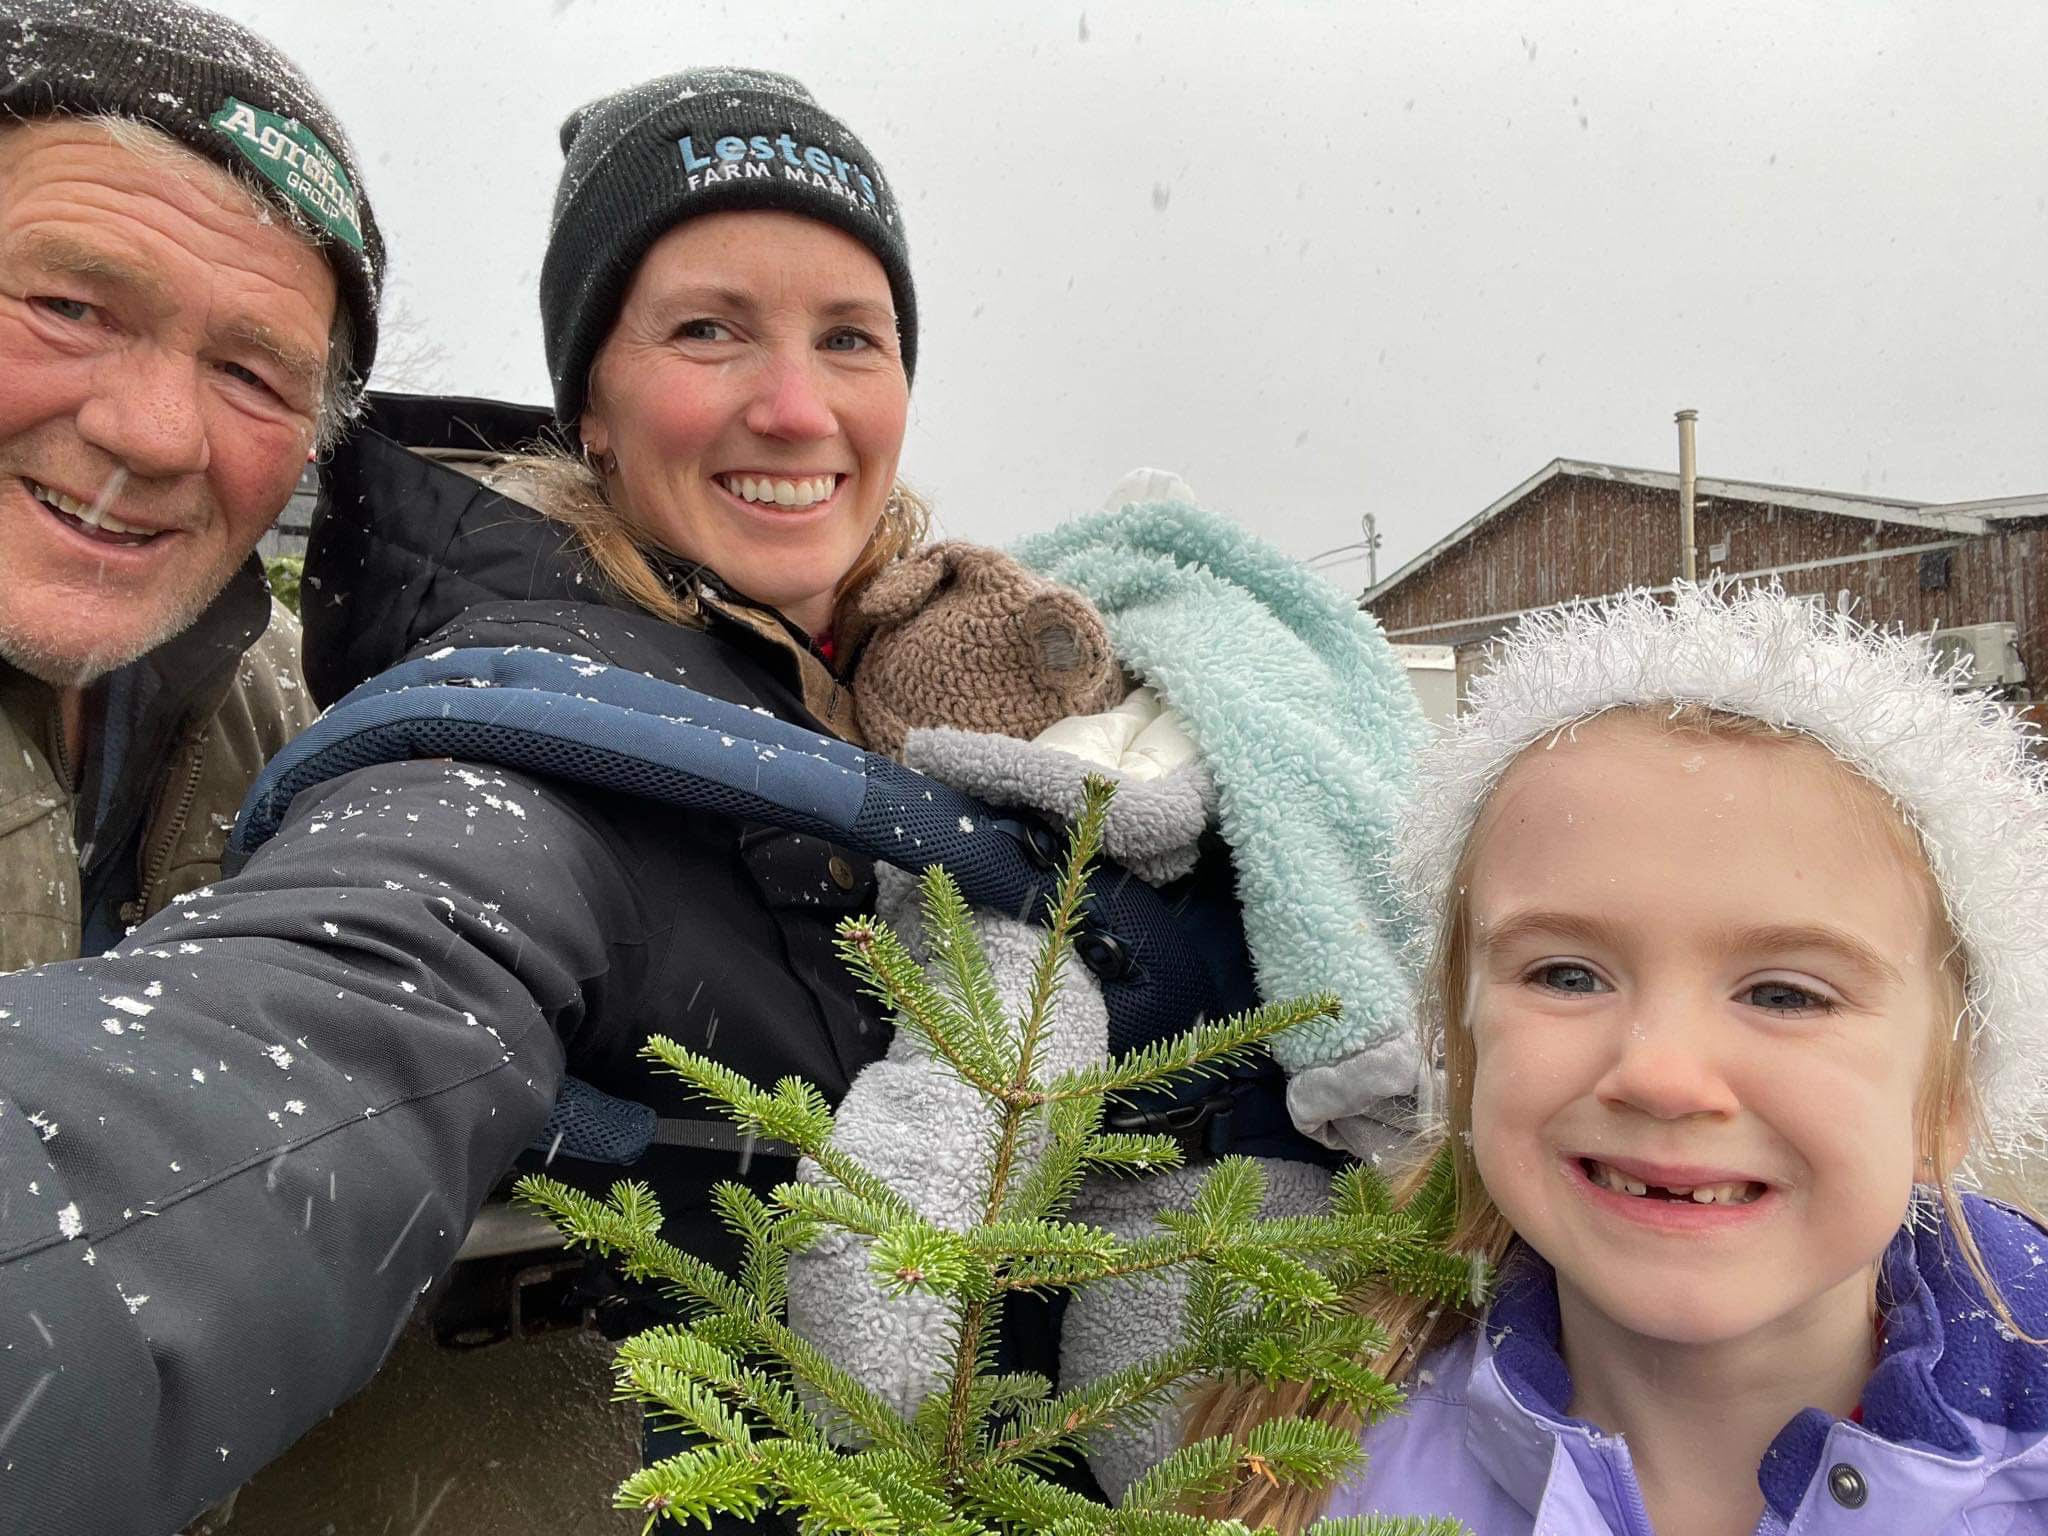 Three people take a selfie in the snow.